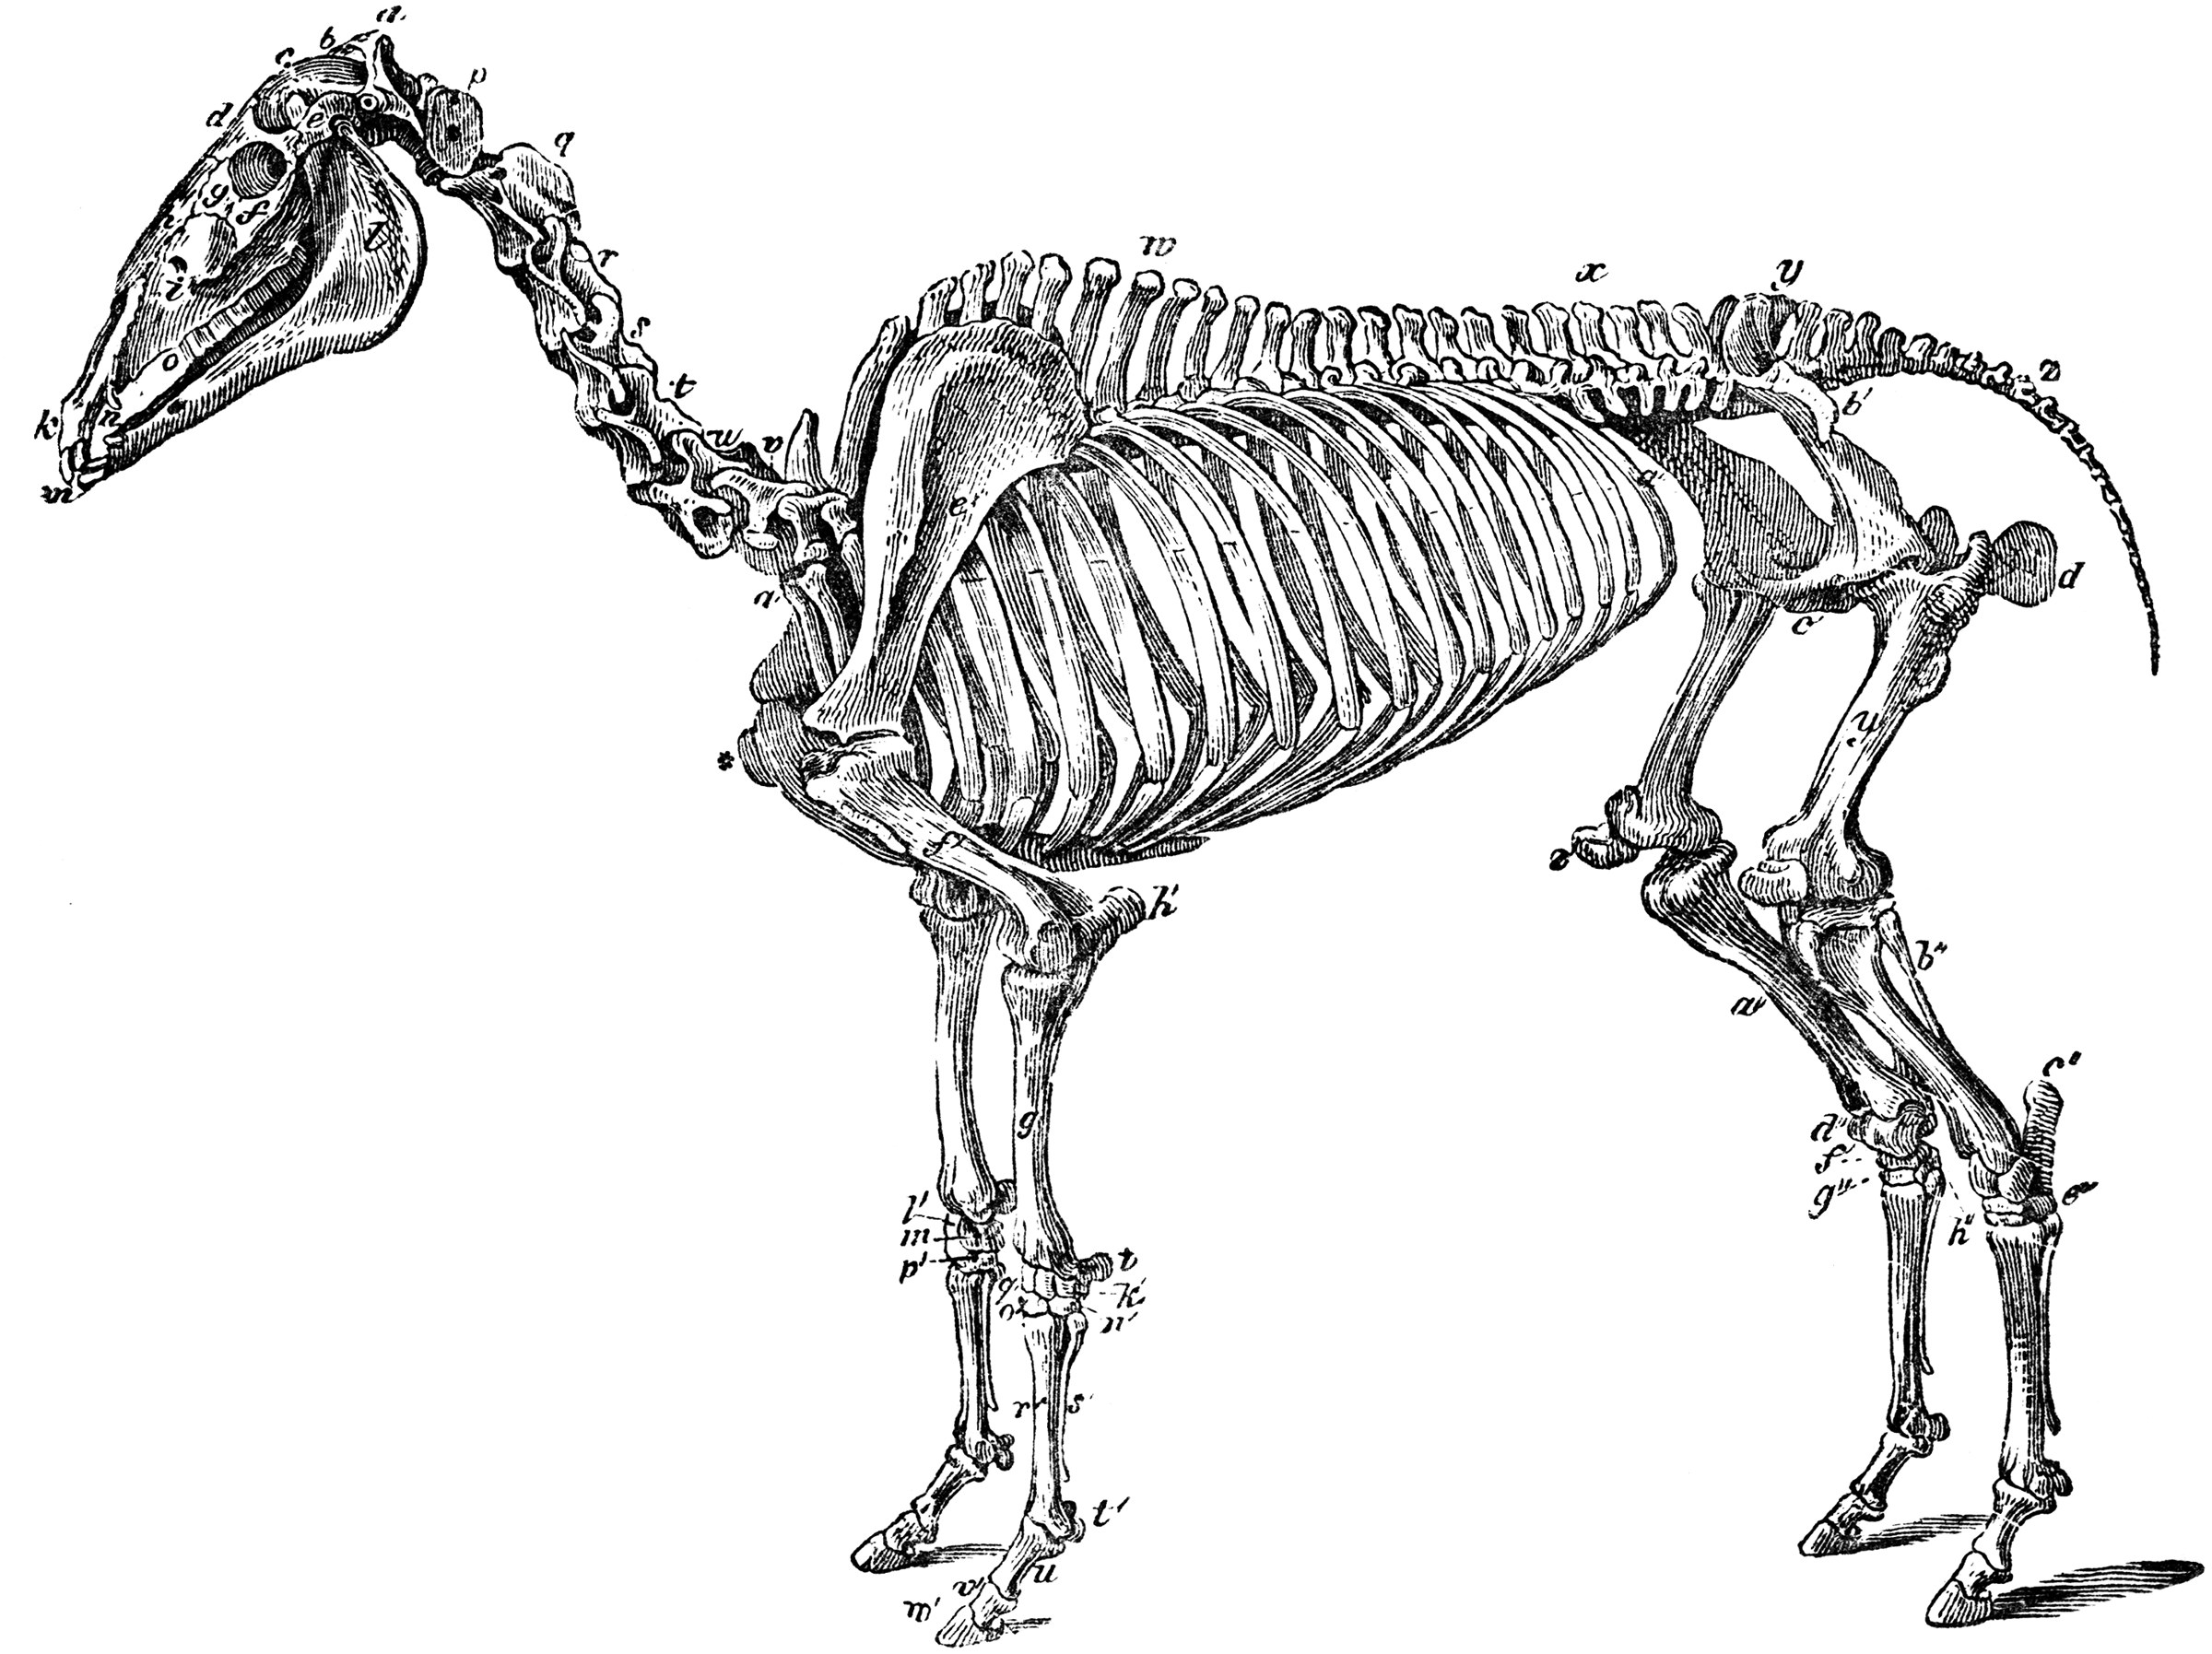 Skeleton of a Horse | ClipArt ETC